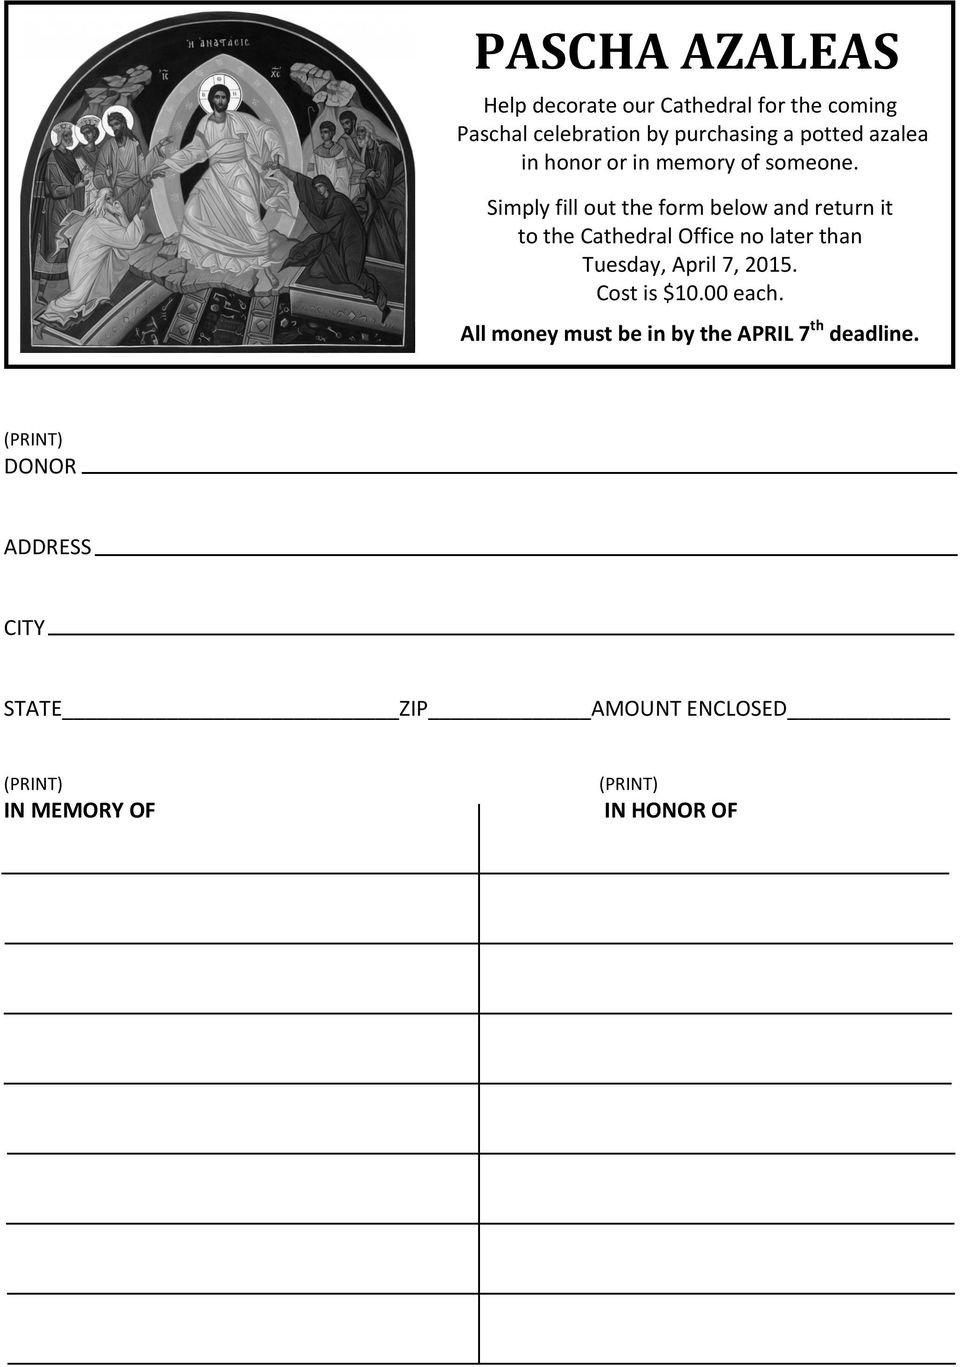 Simply fill out the form below and return it to the Cathedral Office no later than Tuesday, April 7,